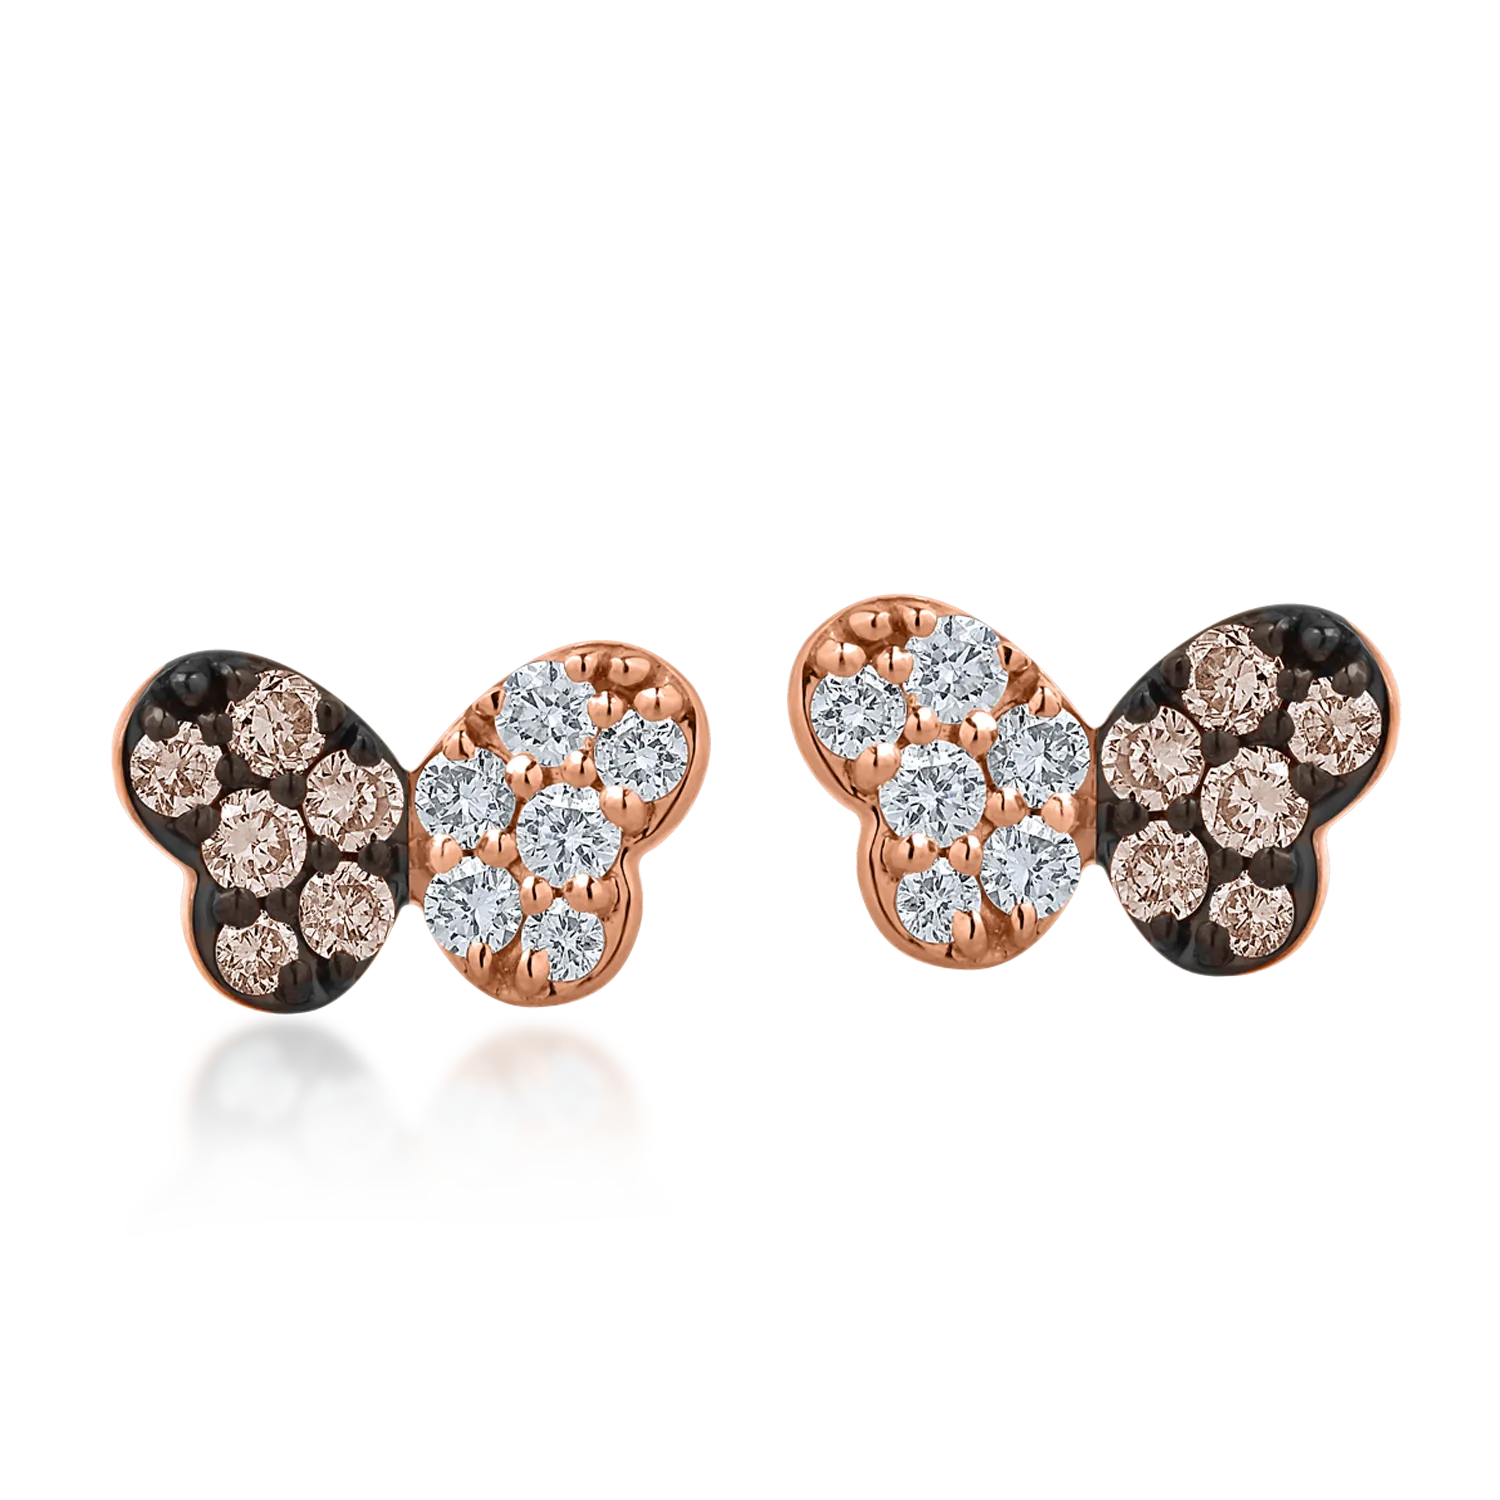 Rose gold butterflies earrings with 0.15ct brown diamonds and 0.14ct clear diamonds